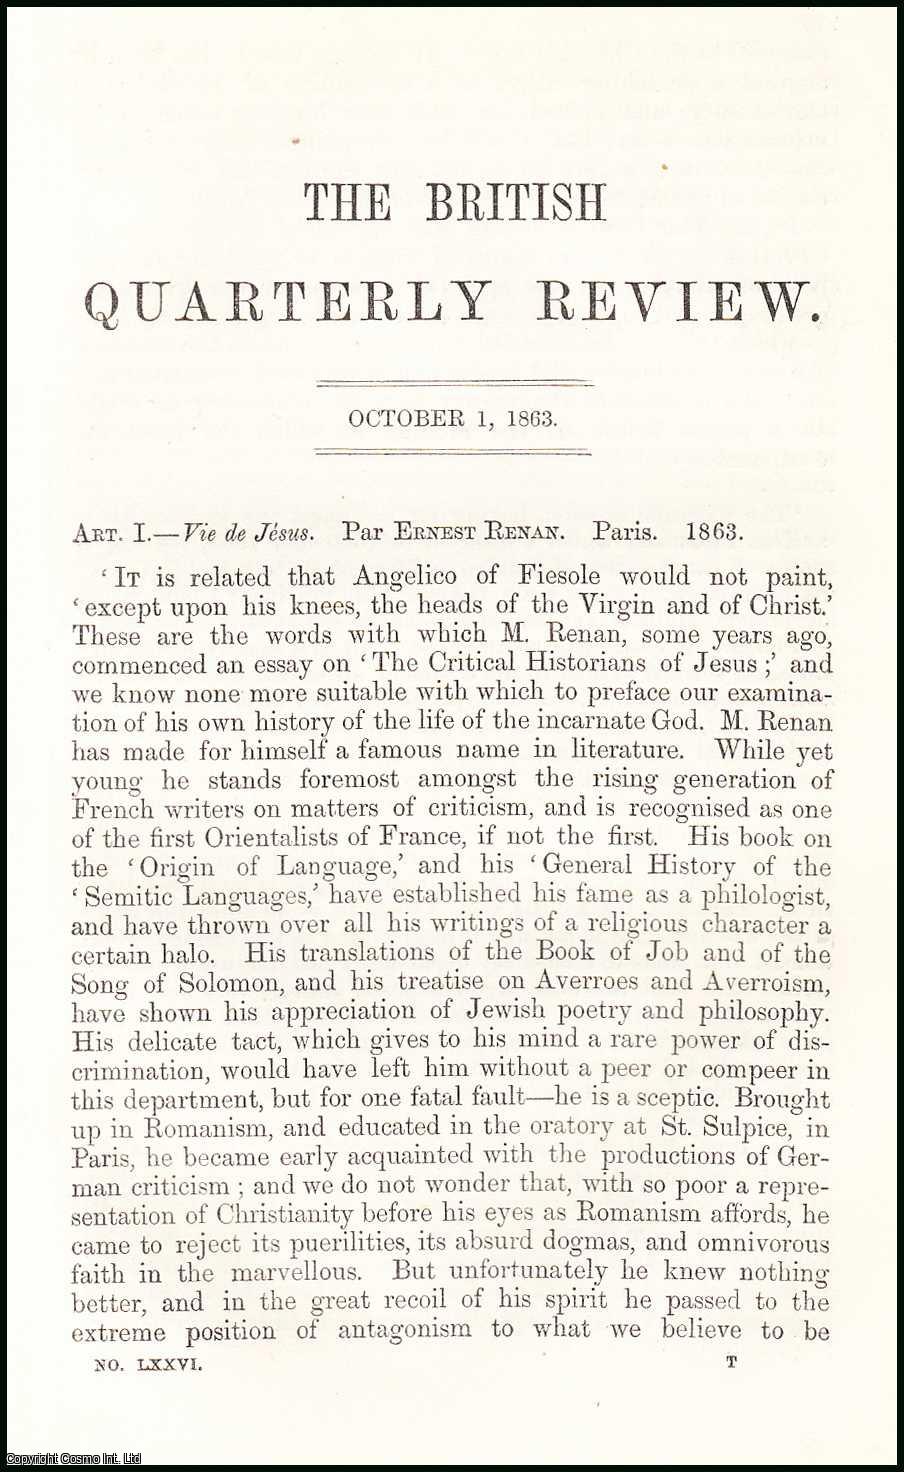 Author Unknown - Renan's Vie de Jesus. A rare original article from the British Quarterly Review, 1863.